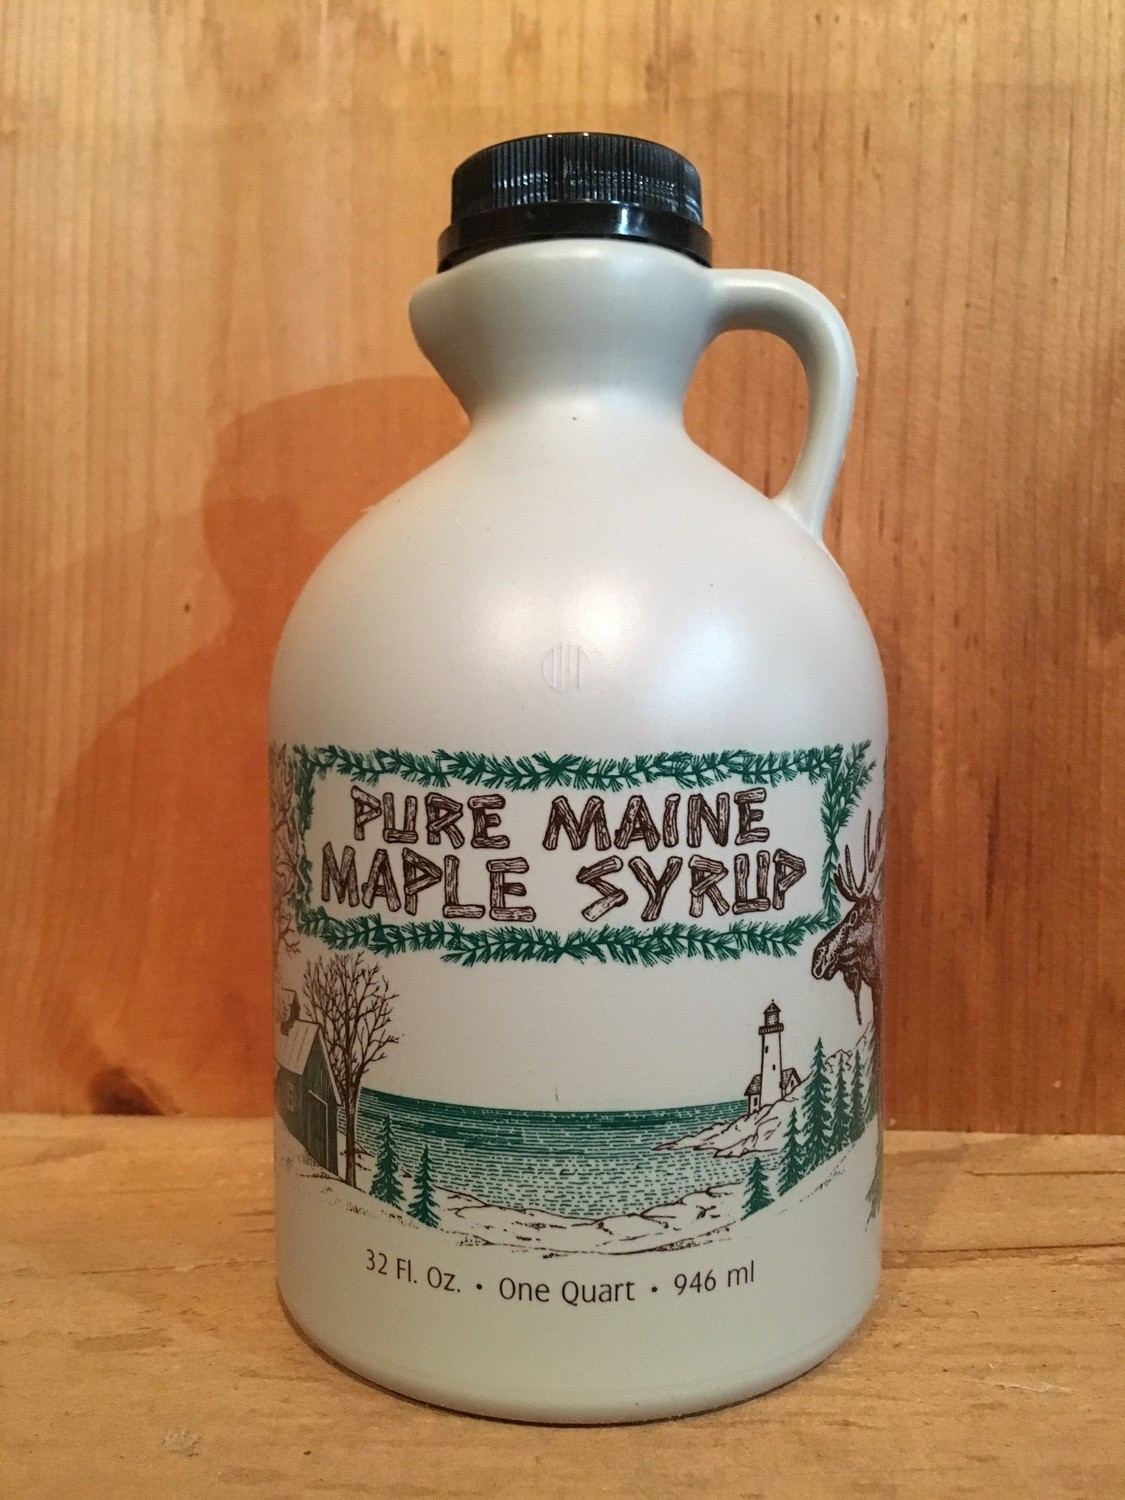 One Quart Maple Syrup